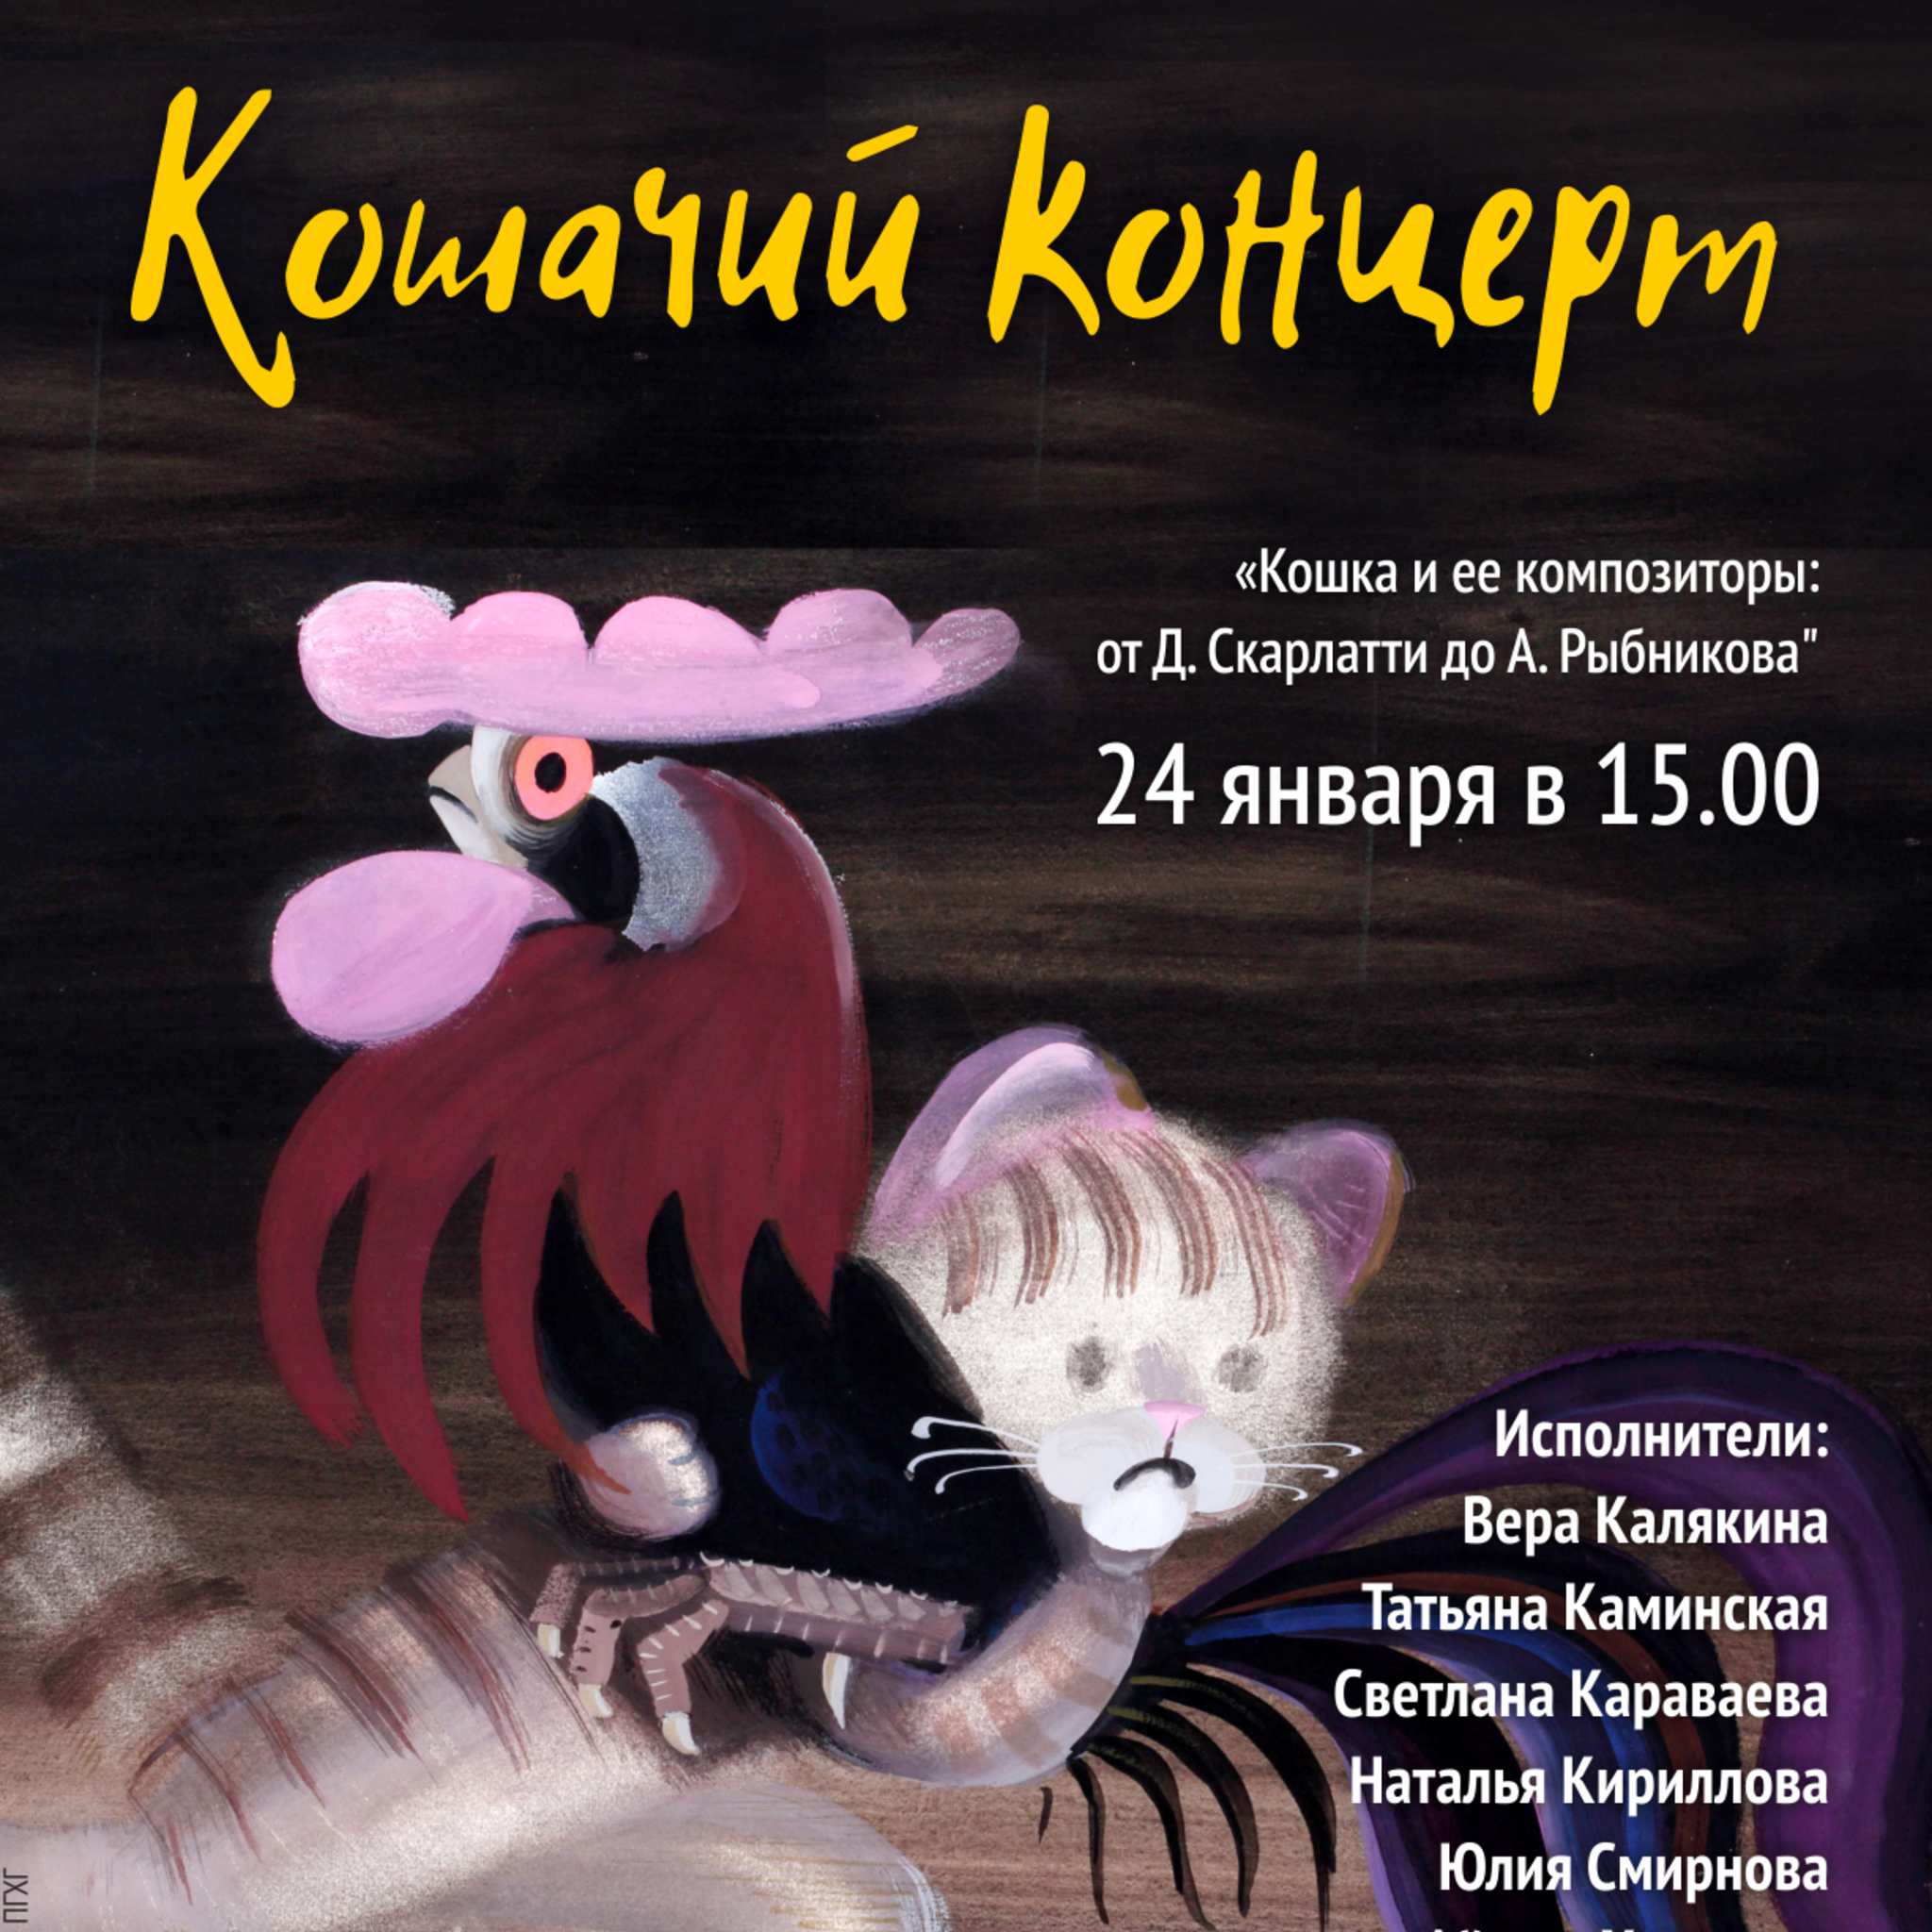 The program of events of the exhibition The Cat and its artists in the Perm Art Gallery